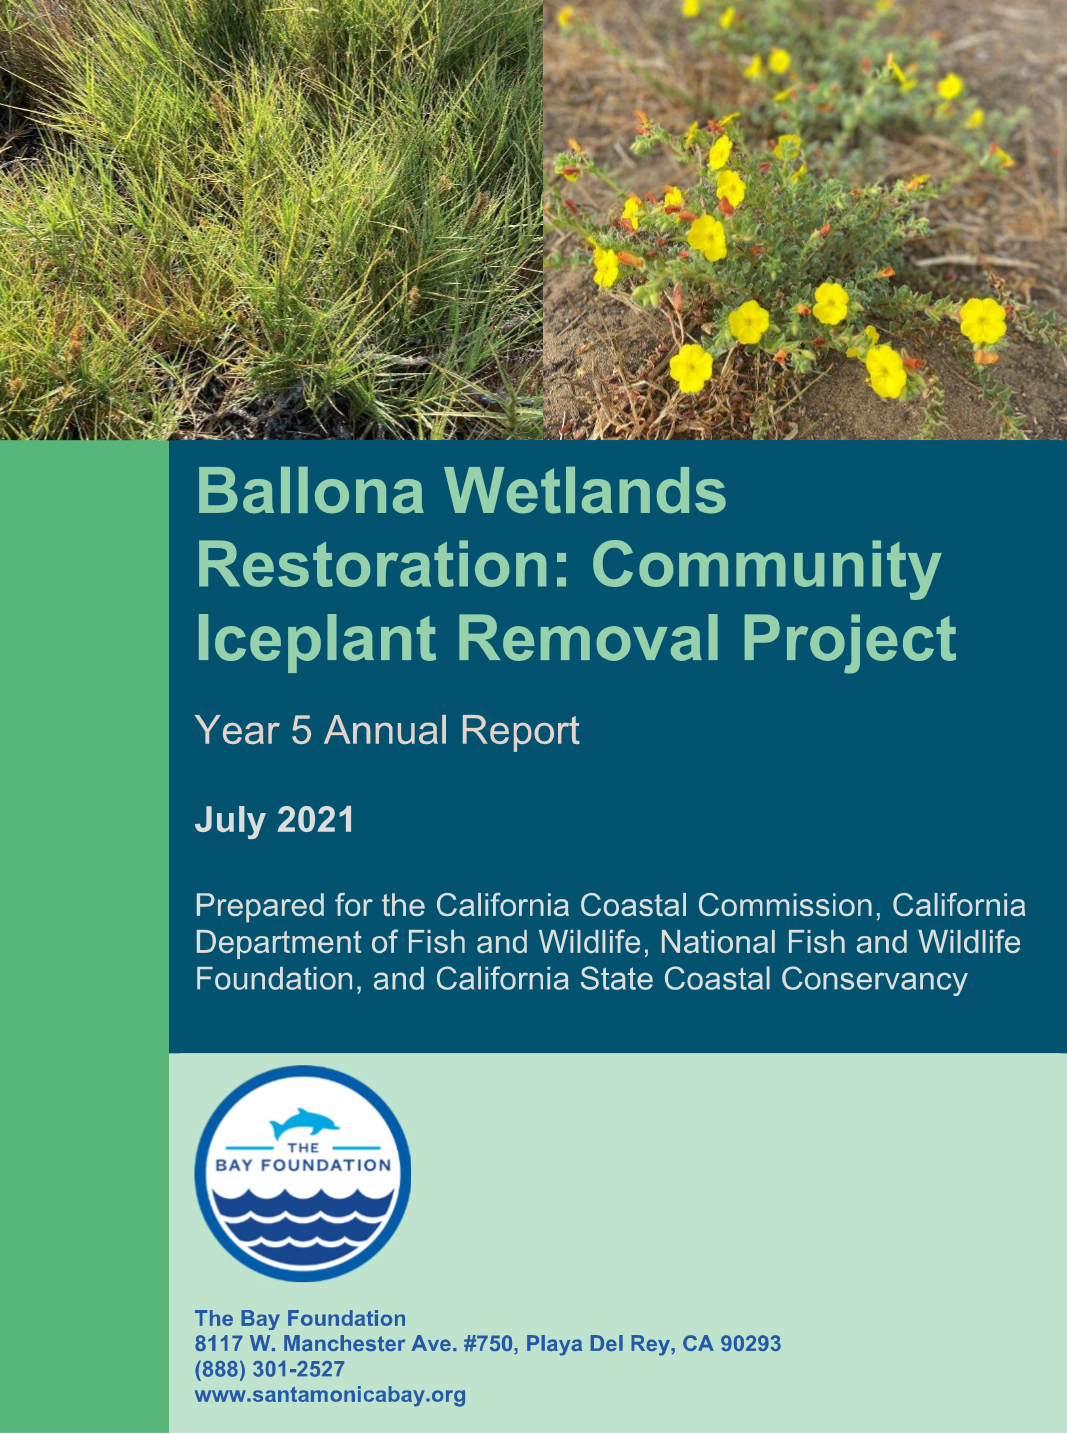 Ballona Wetlands Restoration Community Iceplant Removal Project Year 5 Annual Report